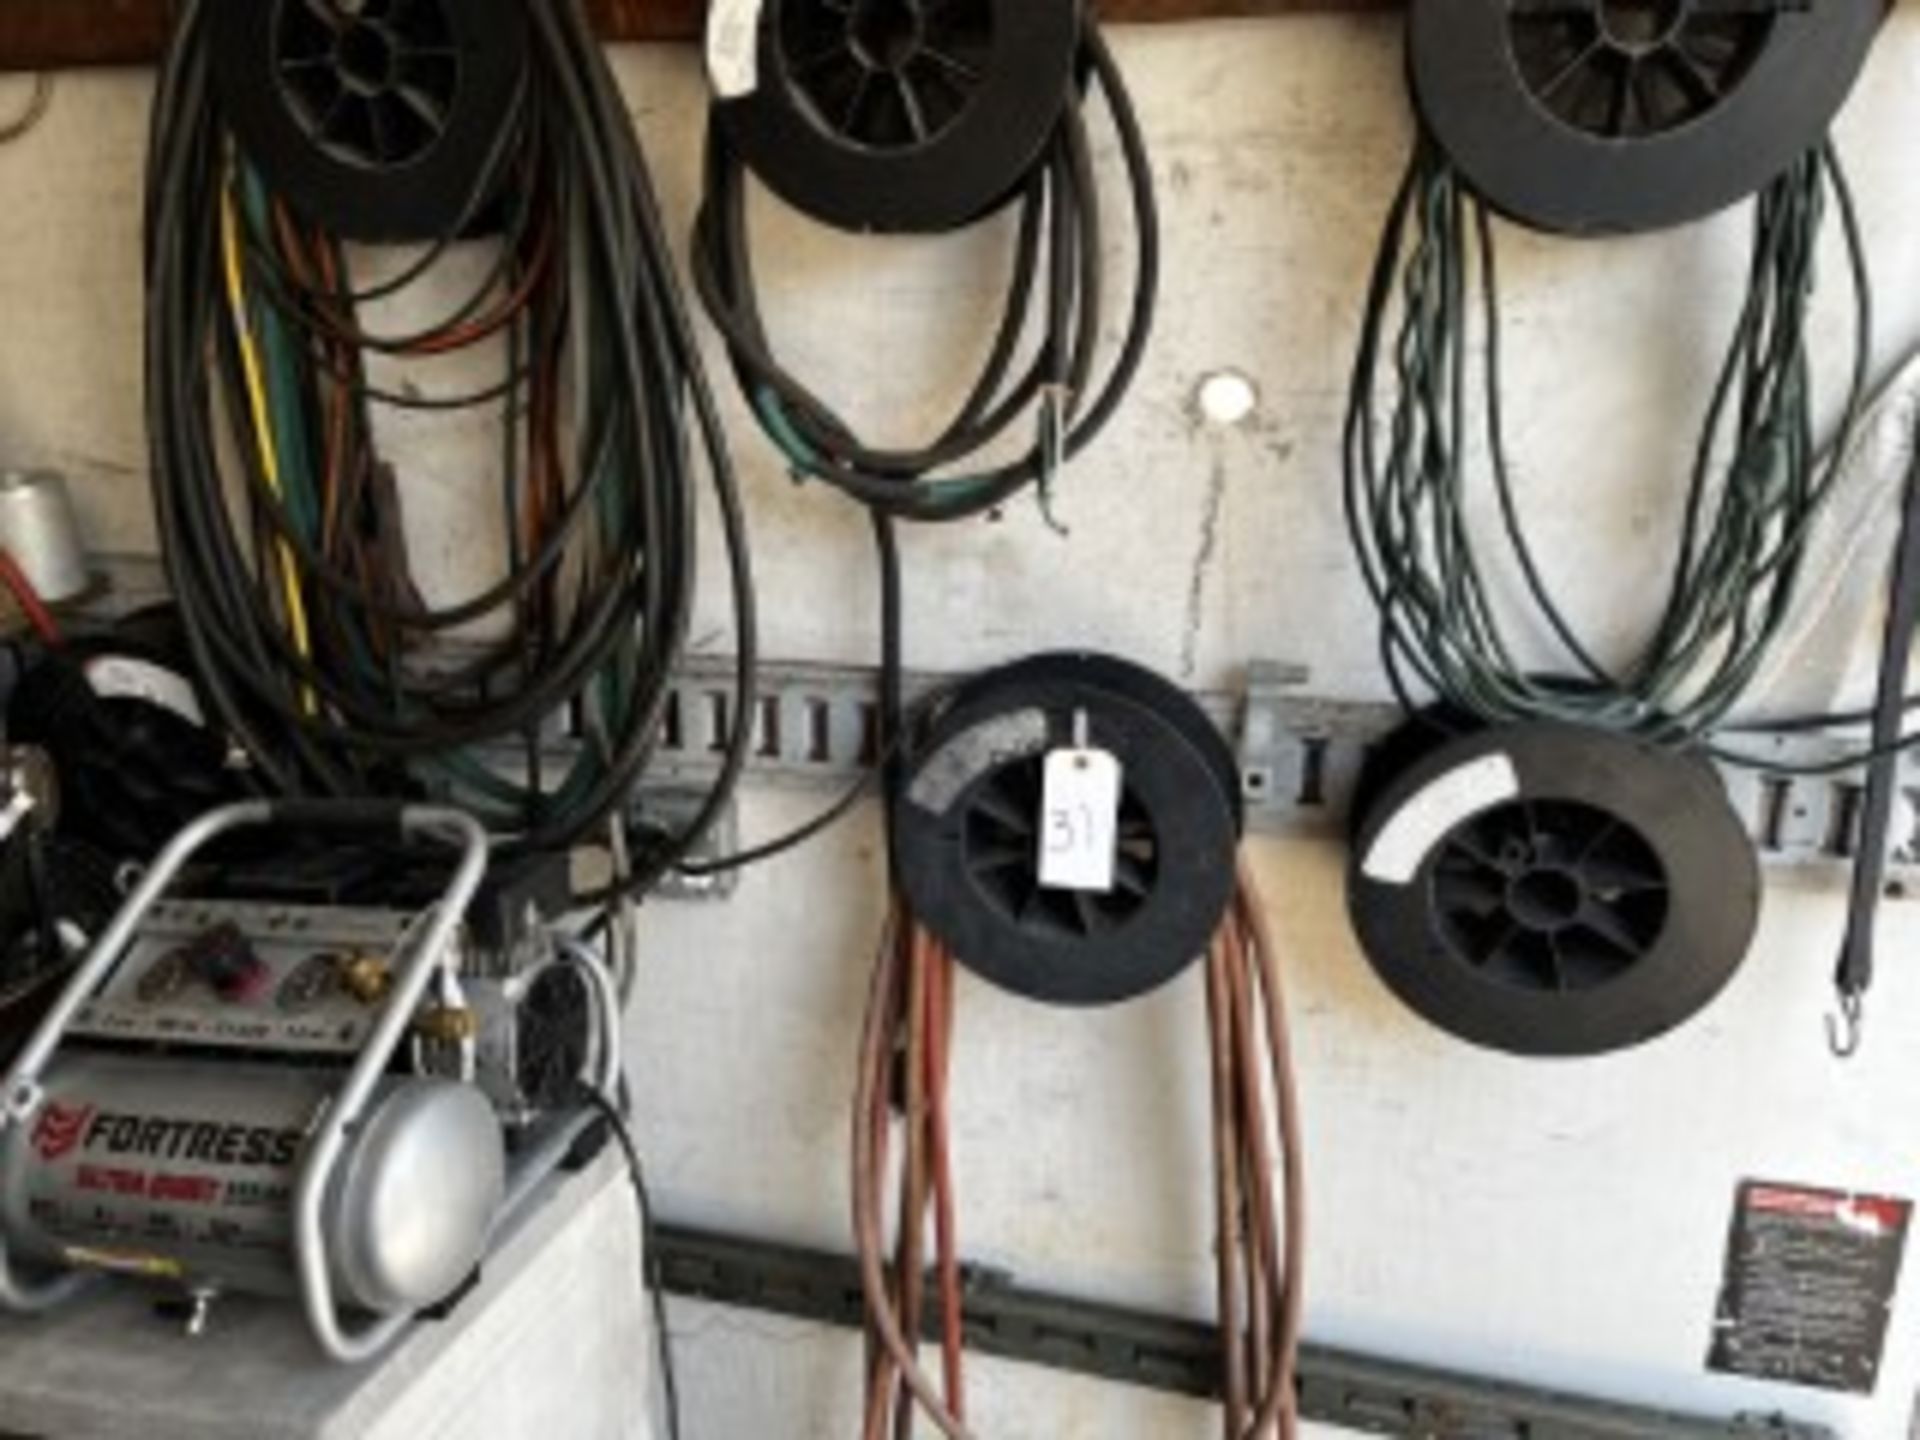 SPOOL OF AIR HOSE & EXTENSION CORDS